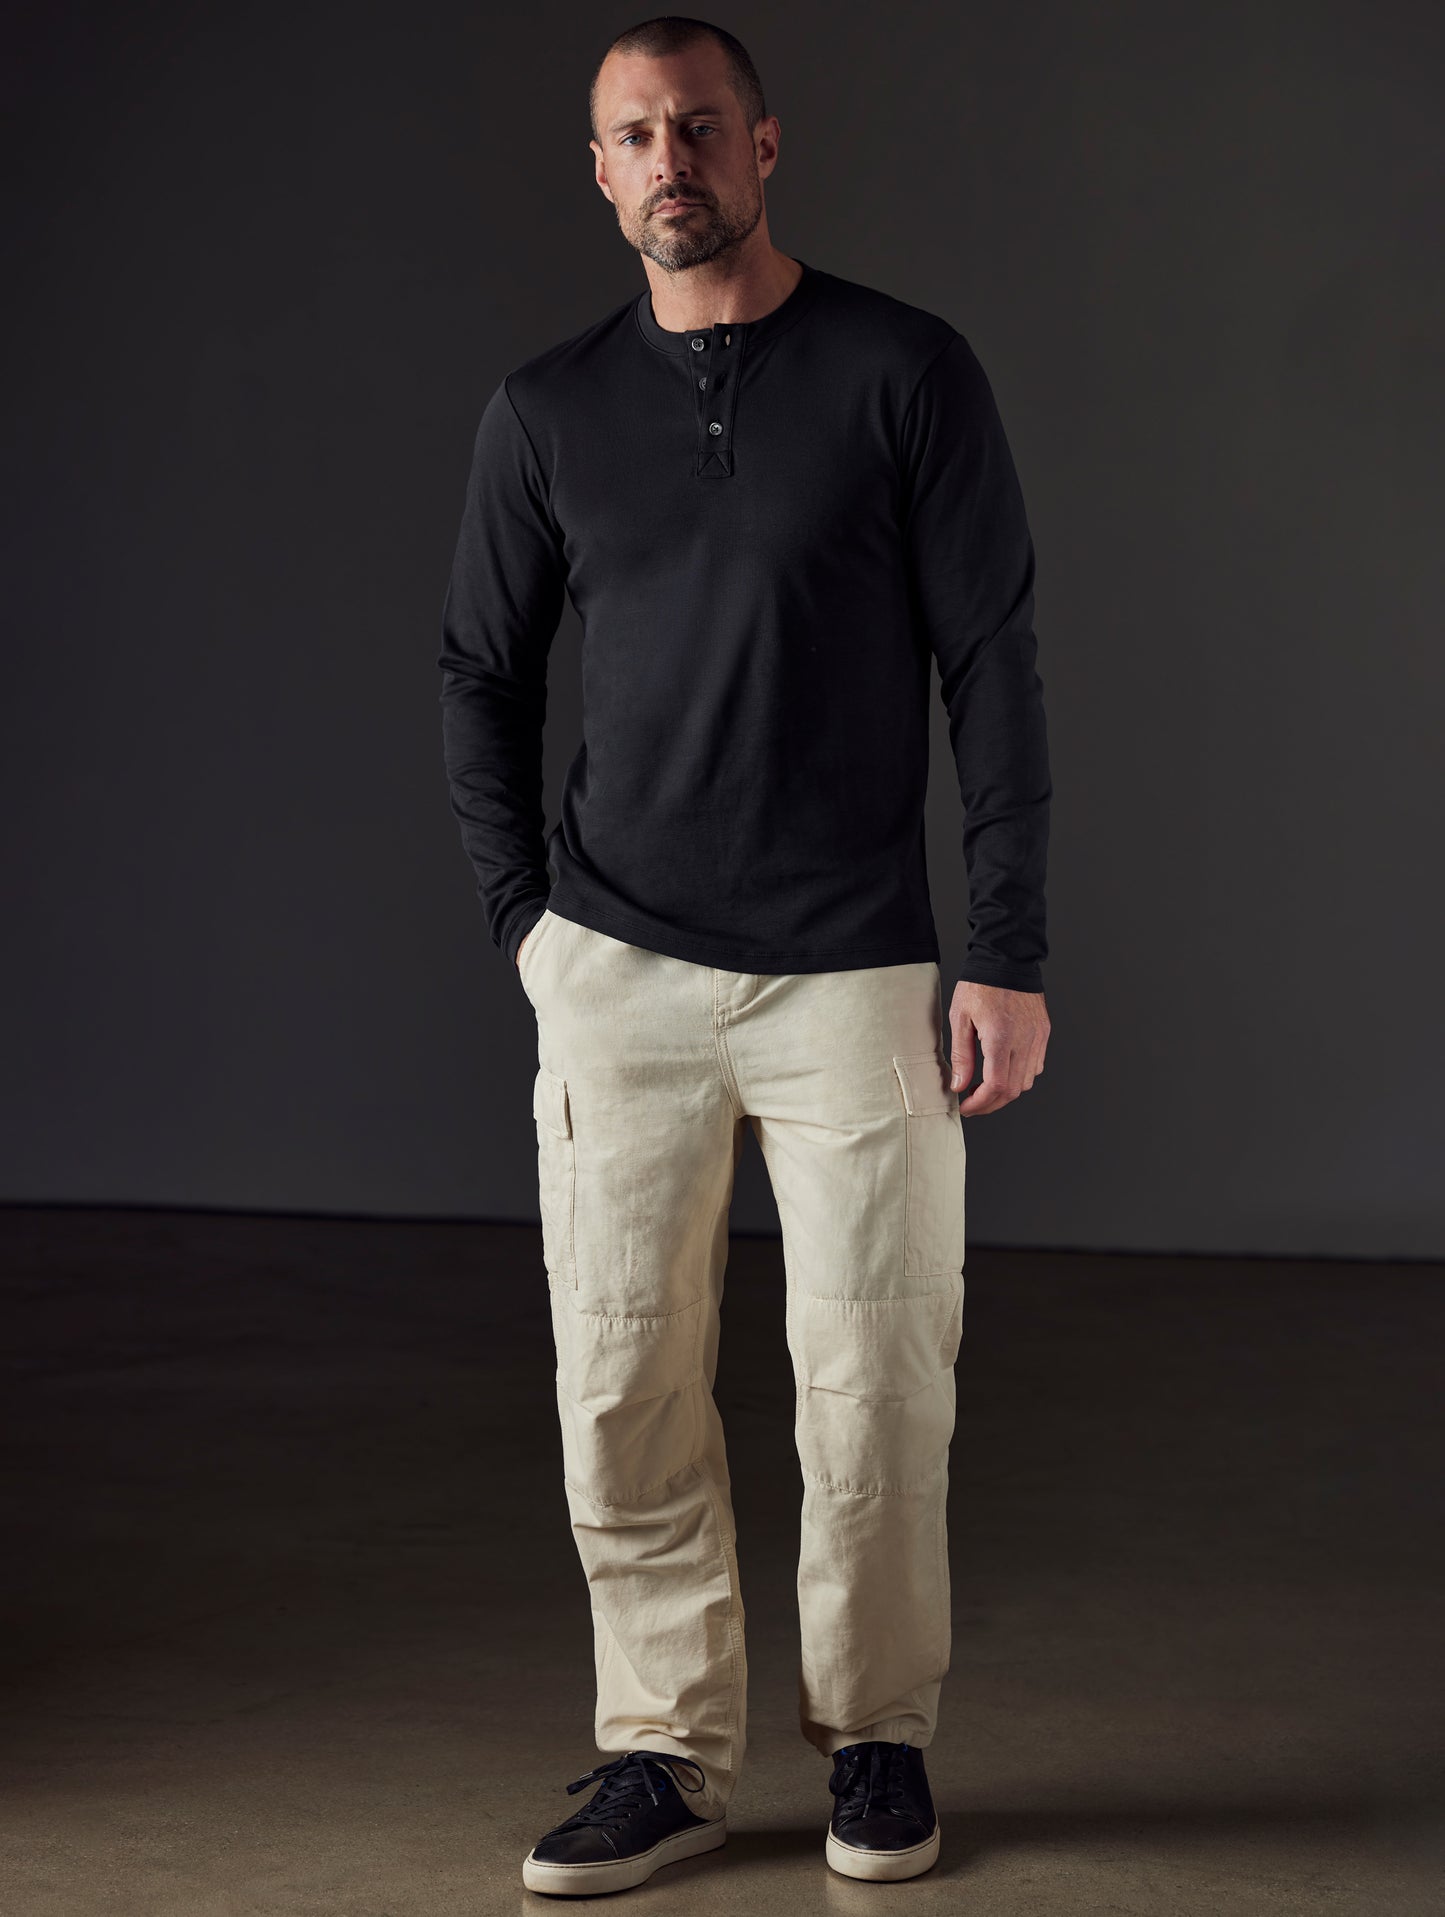 Man wearing black organic cotton henley from AETHER Apparel